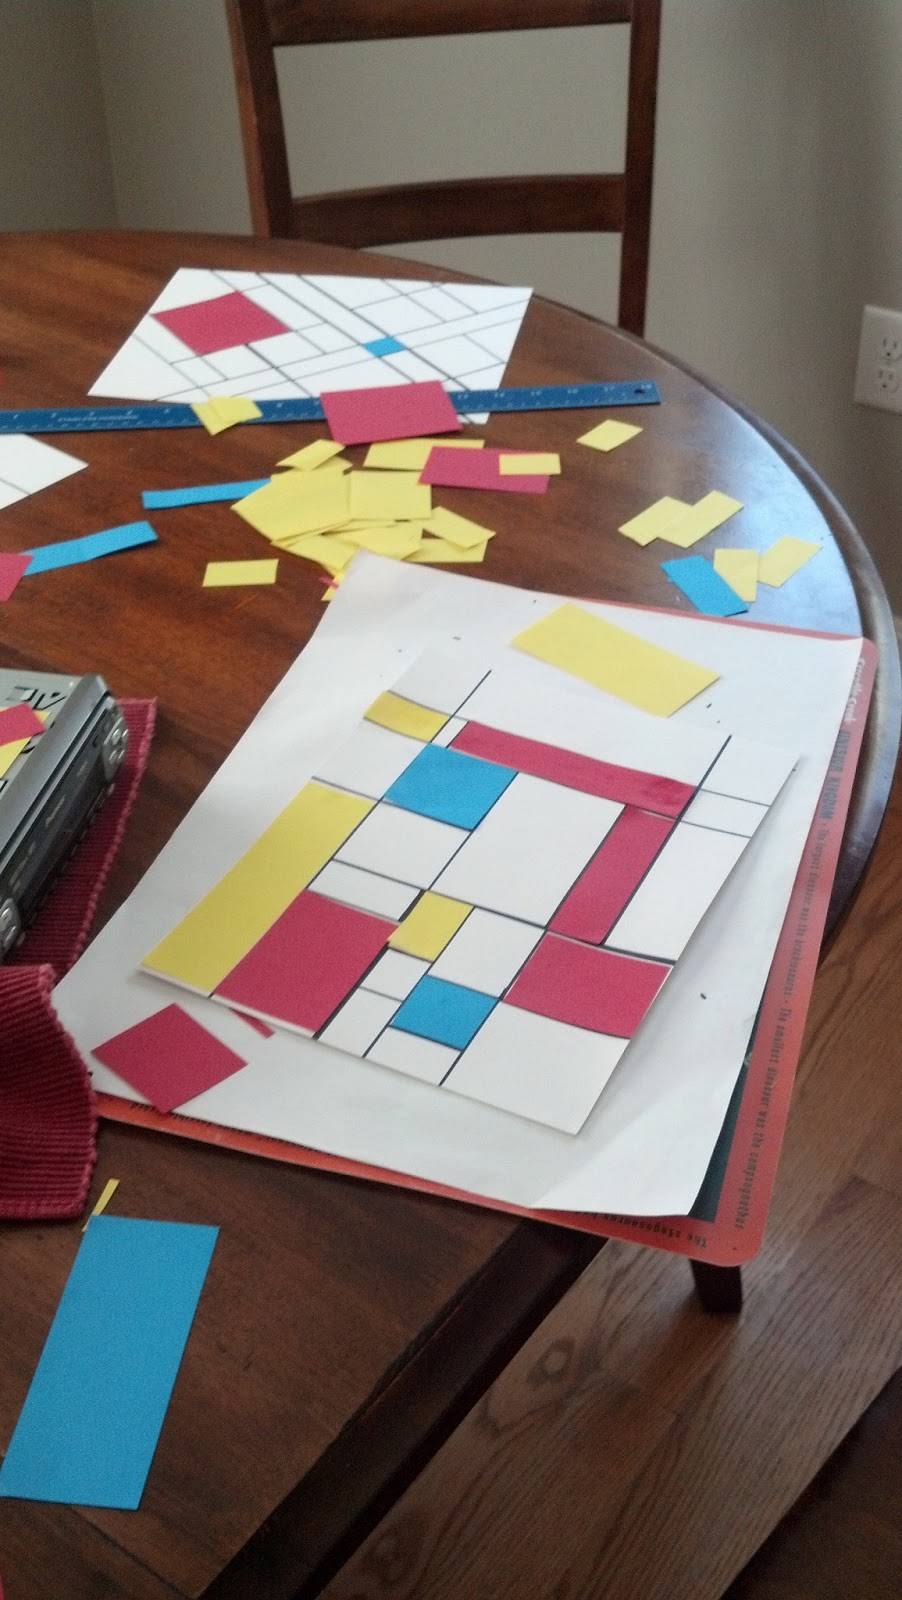 Mondrian Art Project for Kids - The Crafty Classroom